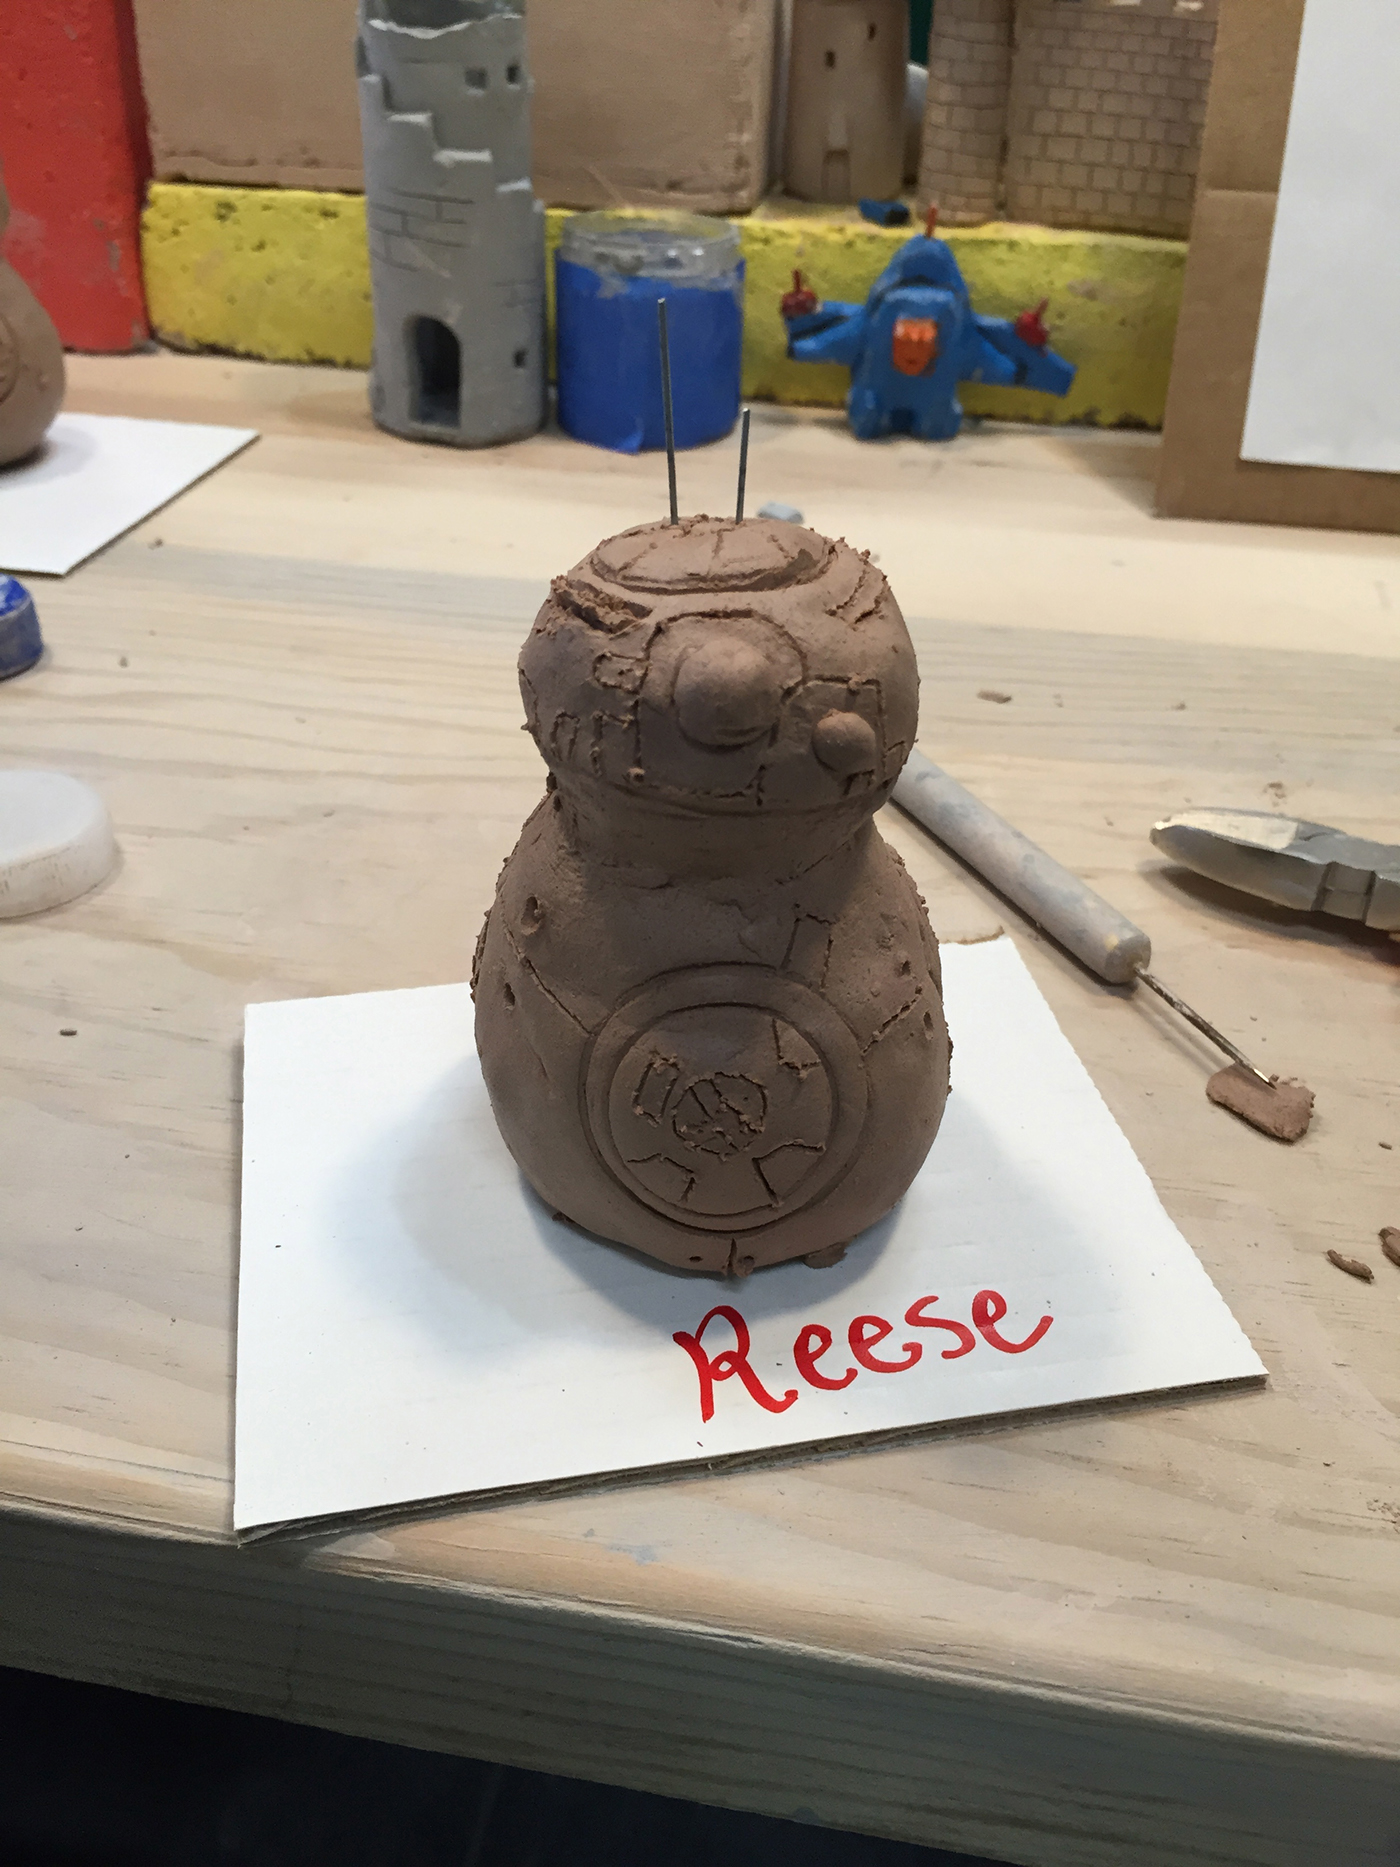 Clay sculptures drawing